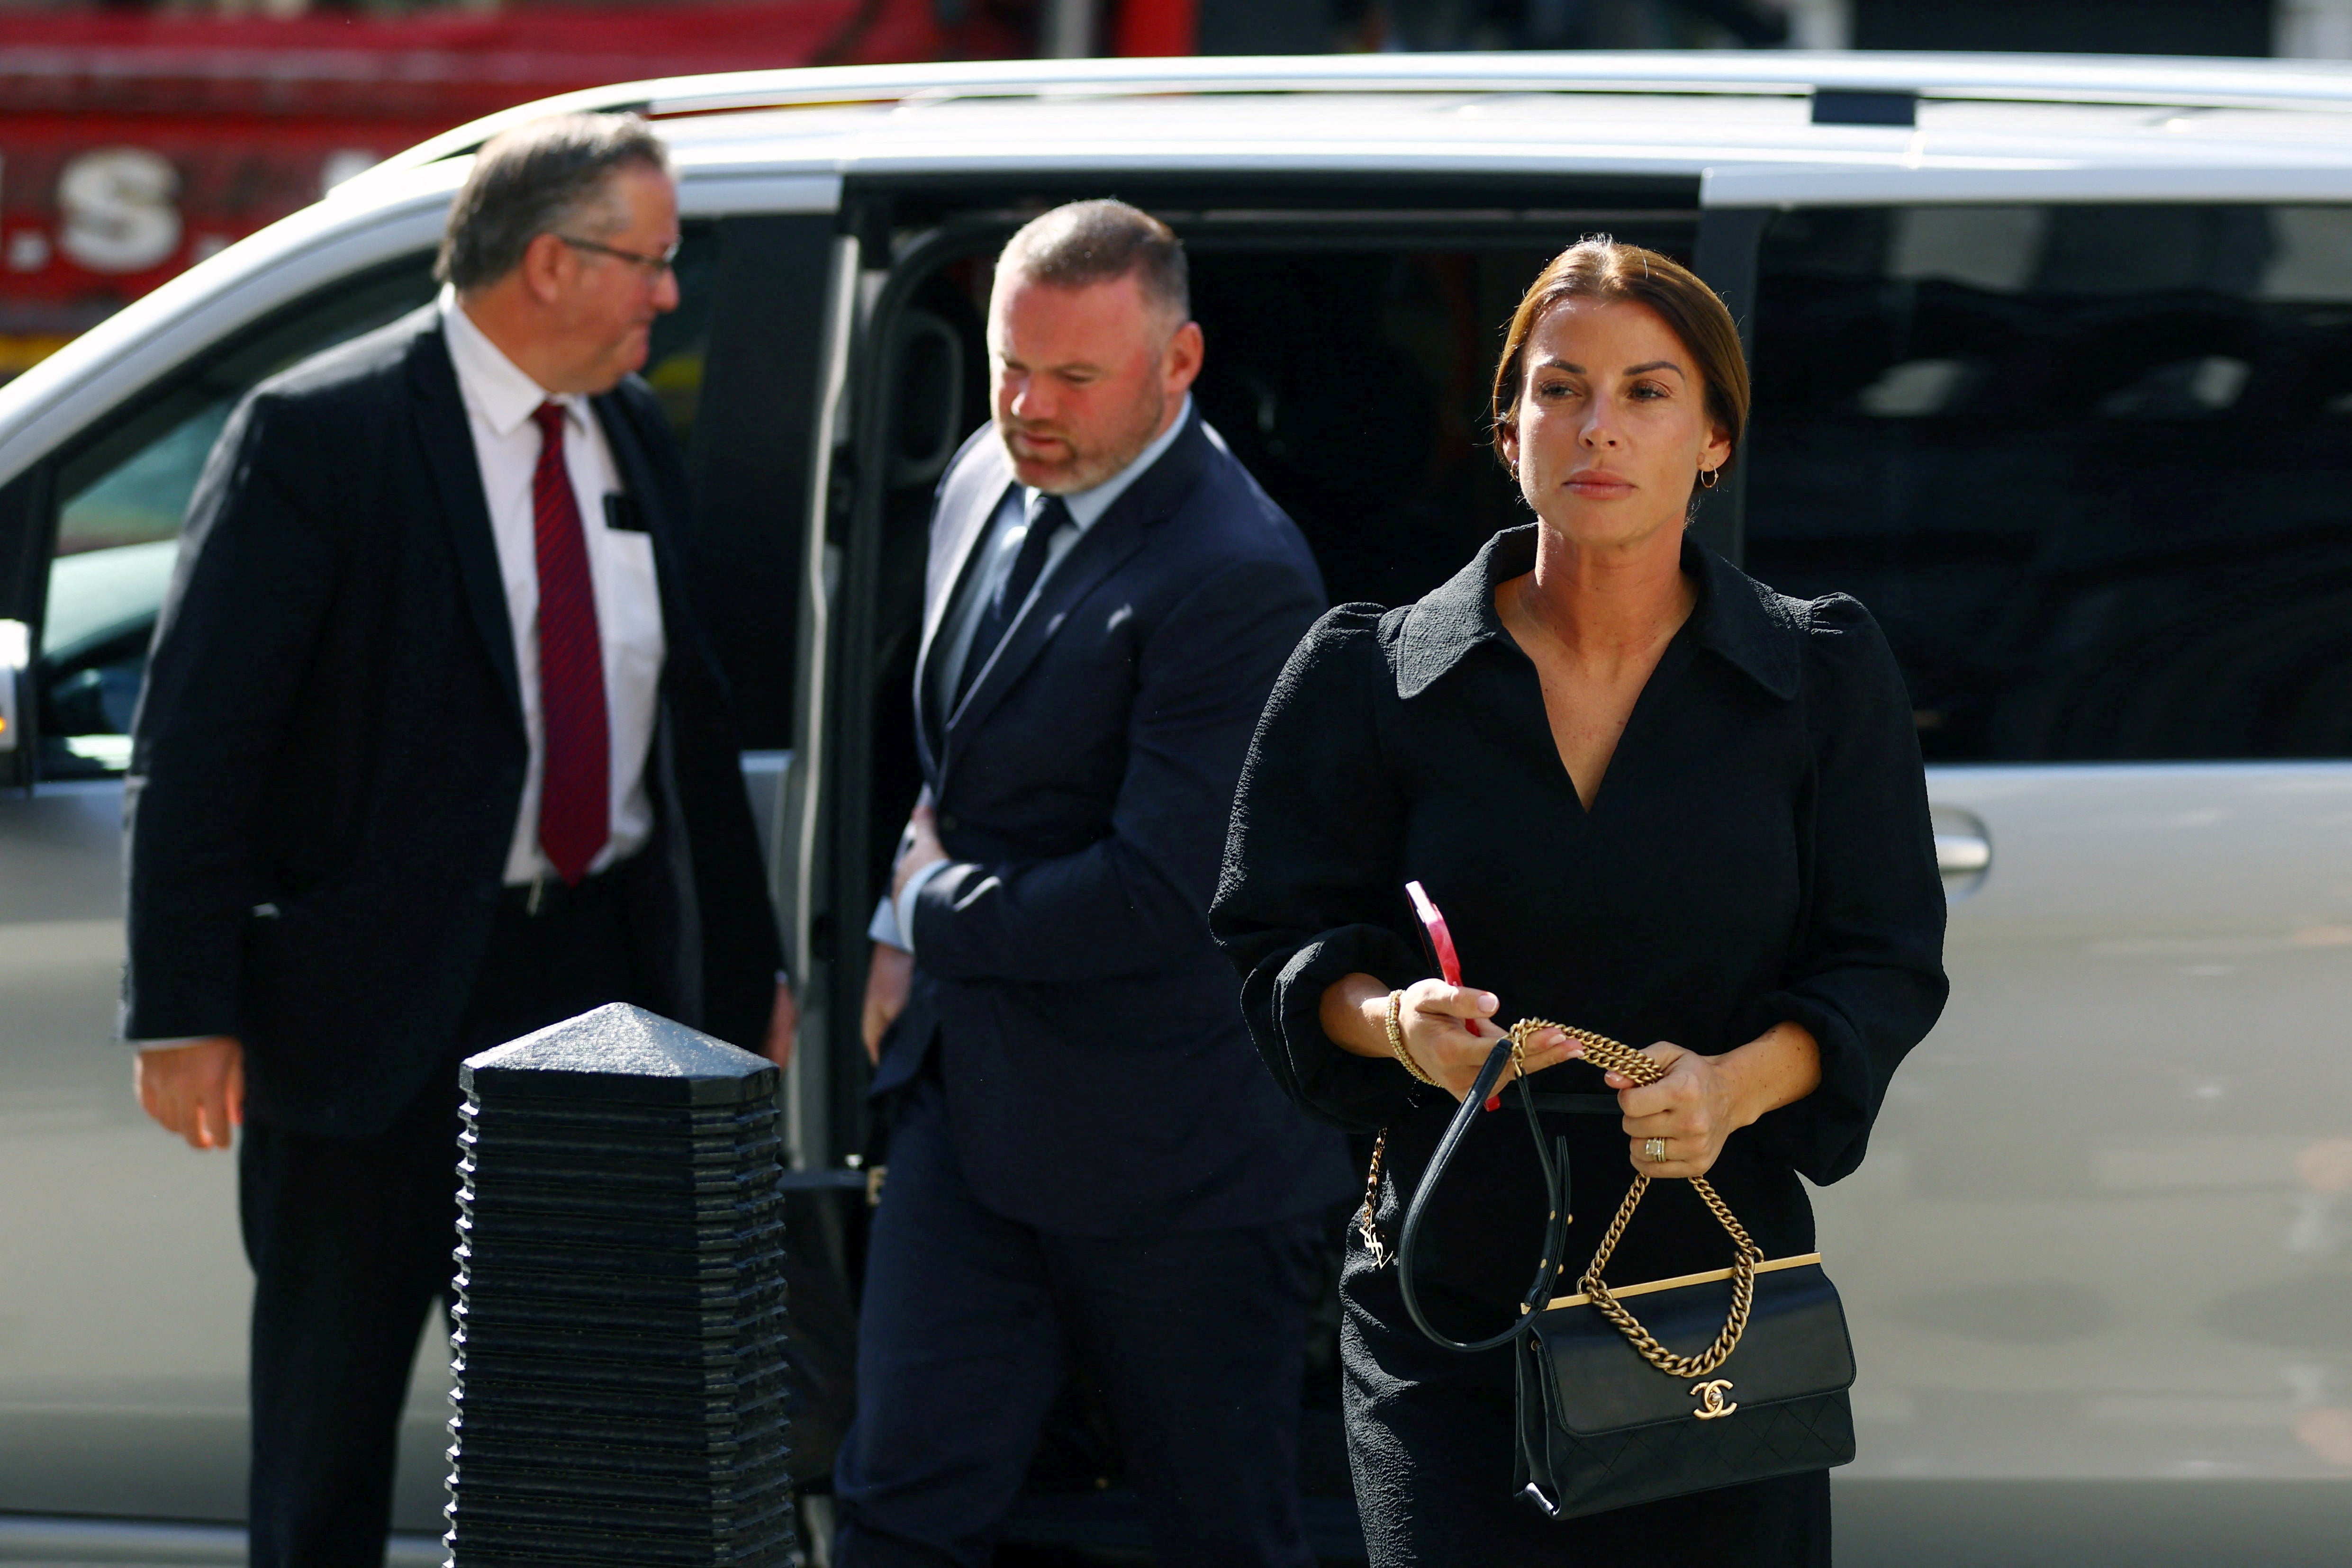 Wayne and Coleen Rooney arrive at the High Court